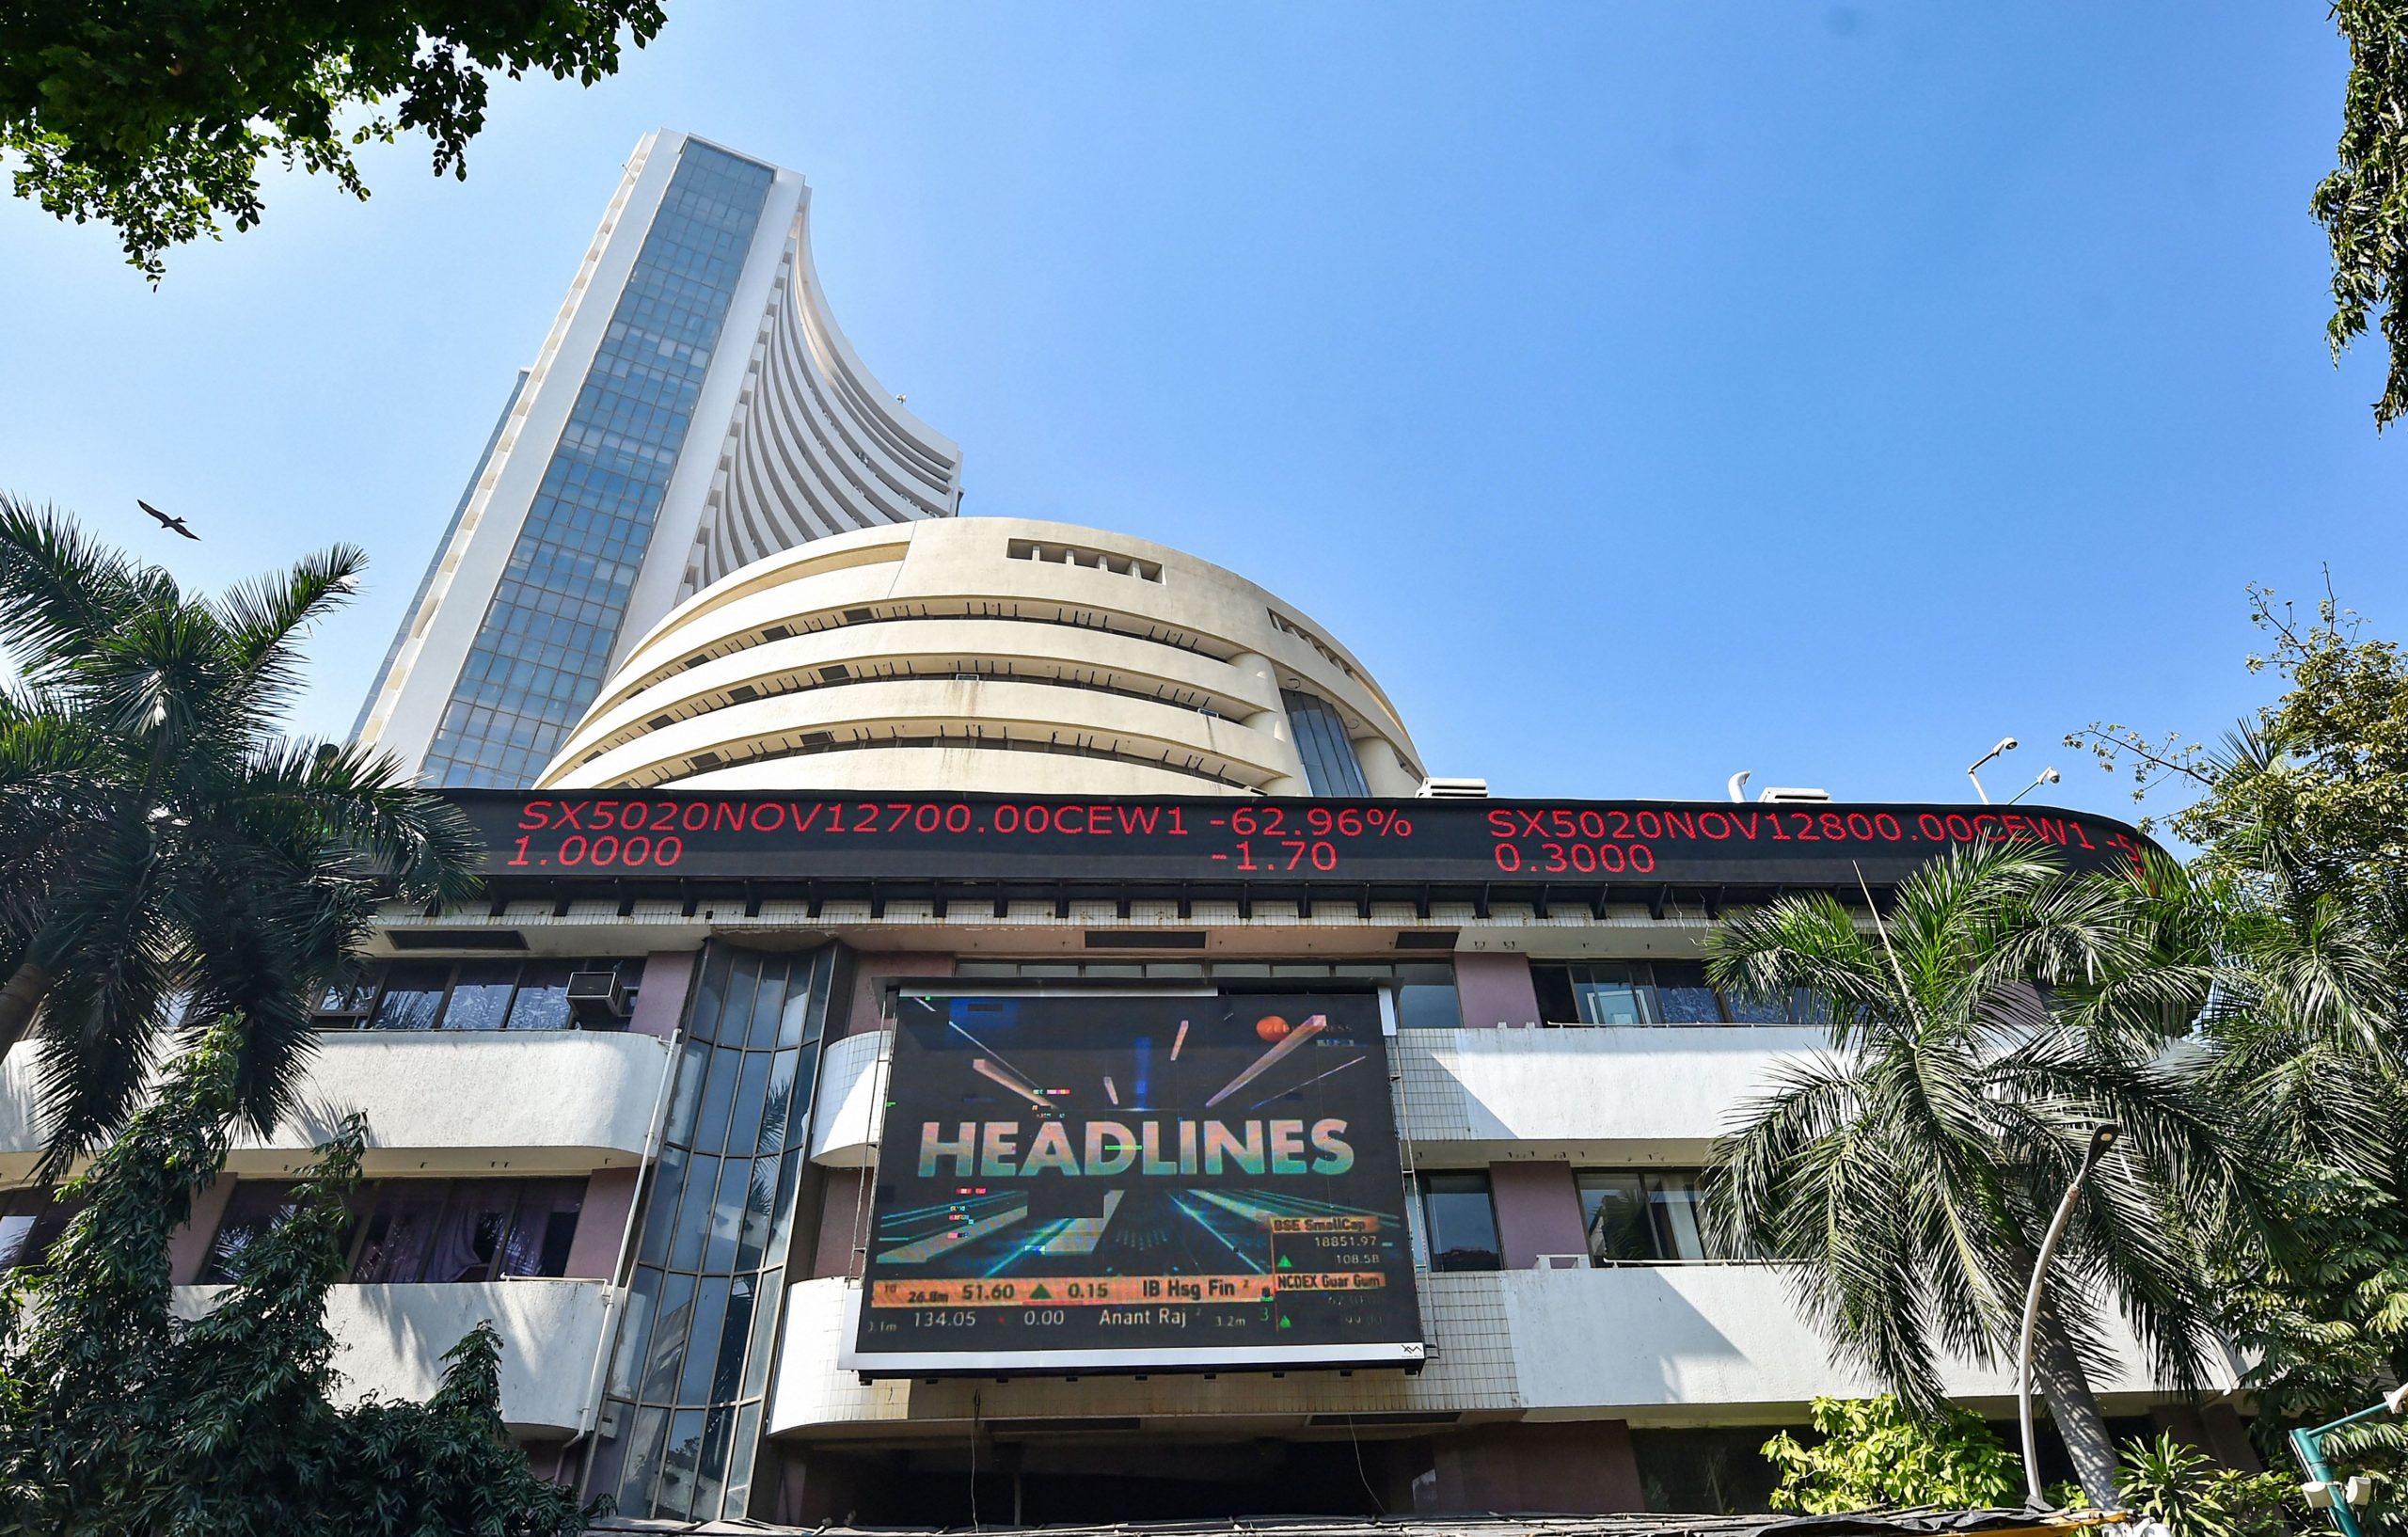 Sensex, Nifty open high amid positive global cues